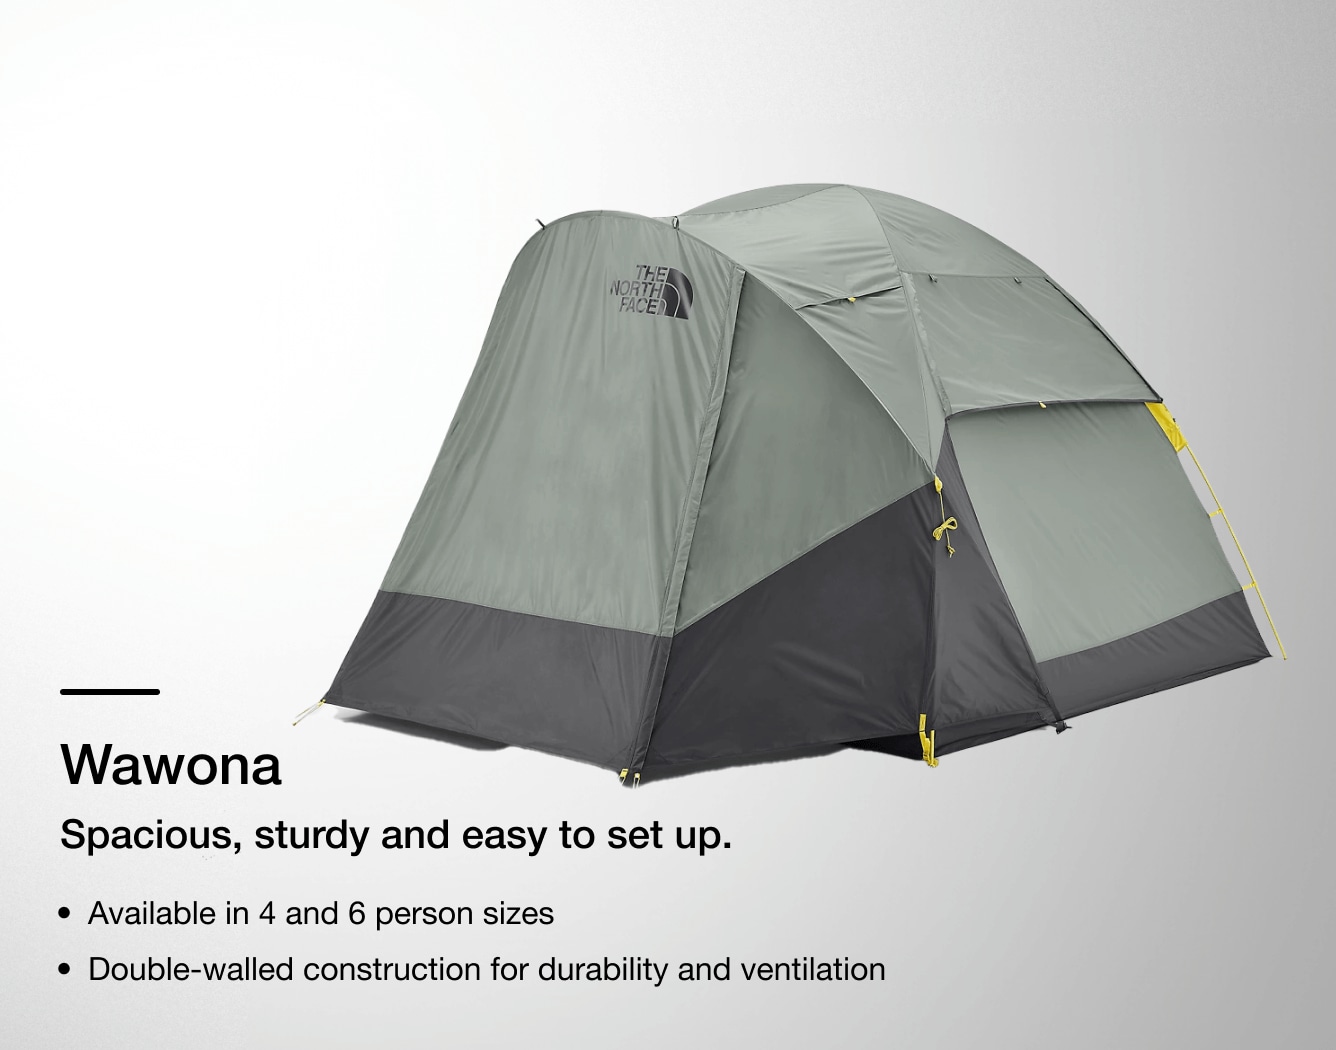 Image detailing features of the Wawona tent from The North Face.